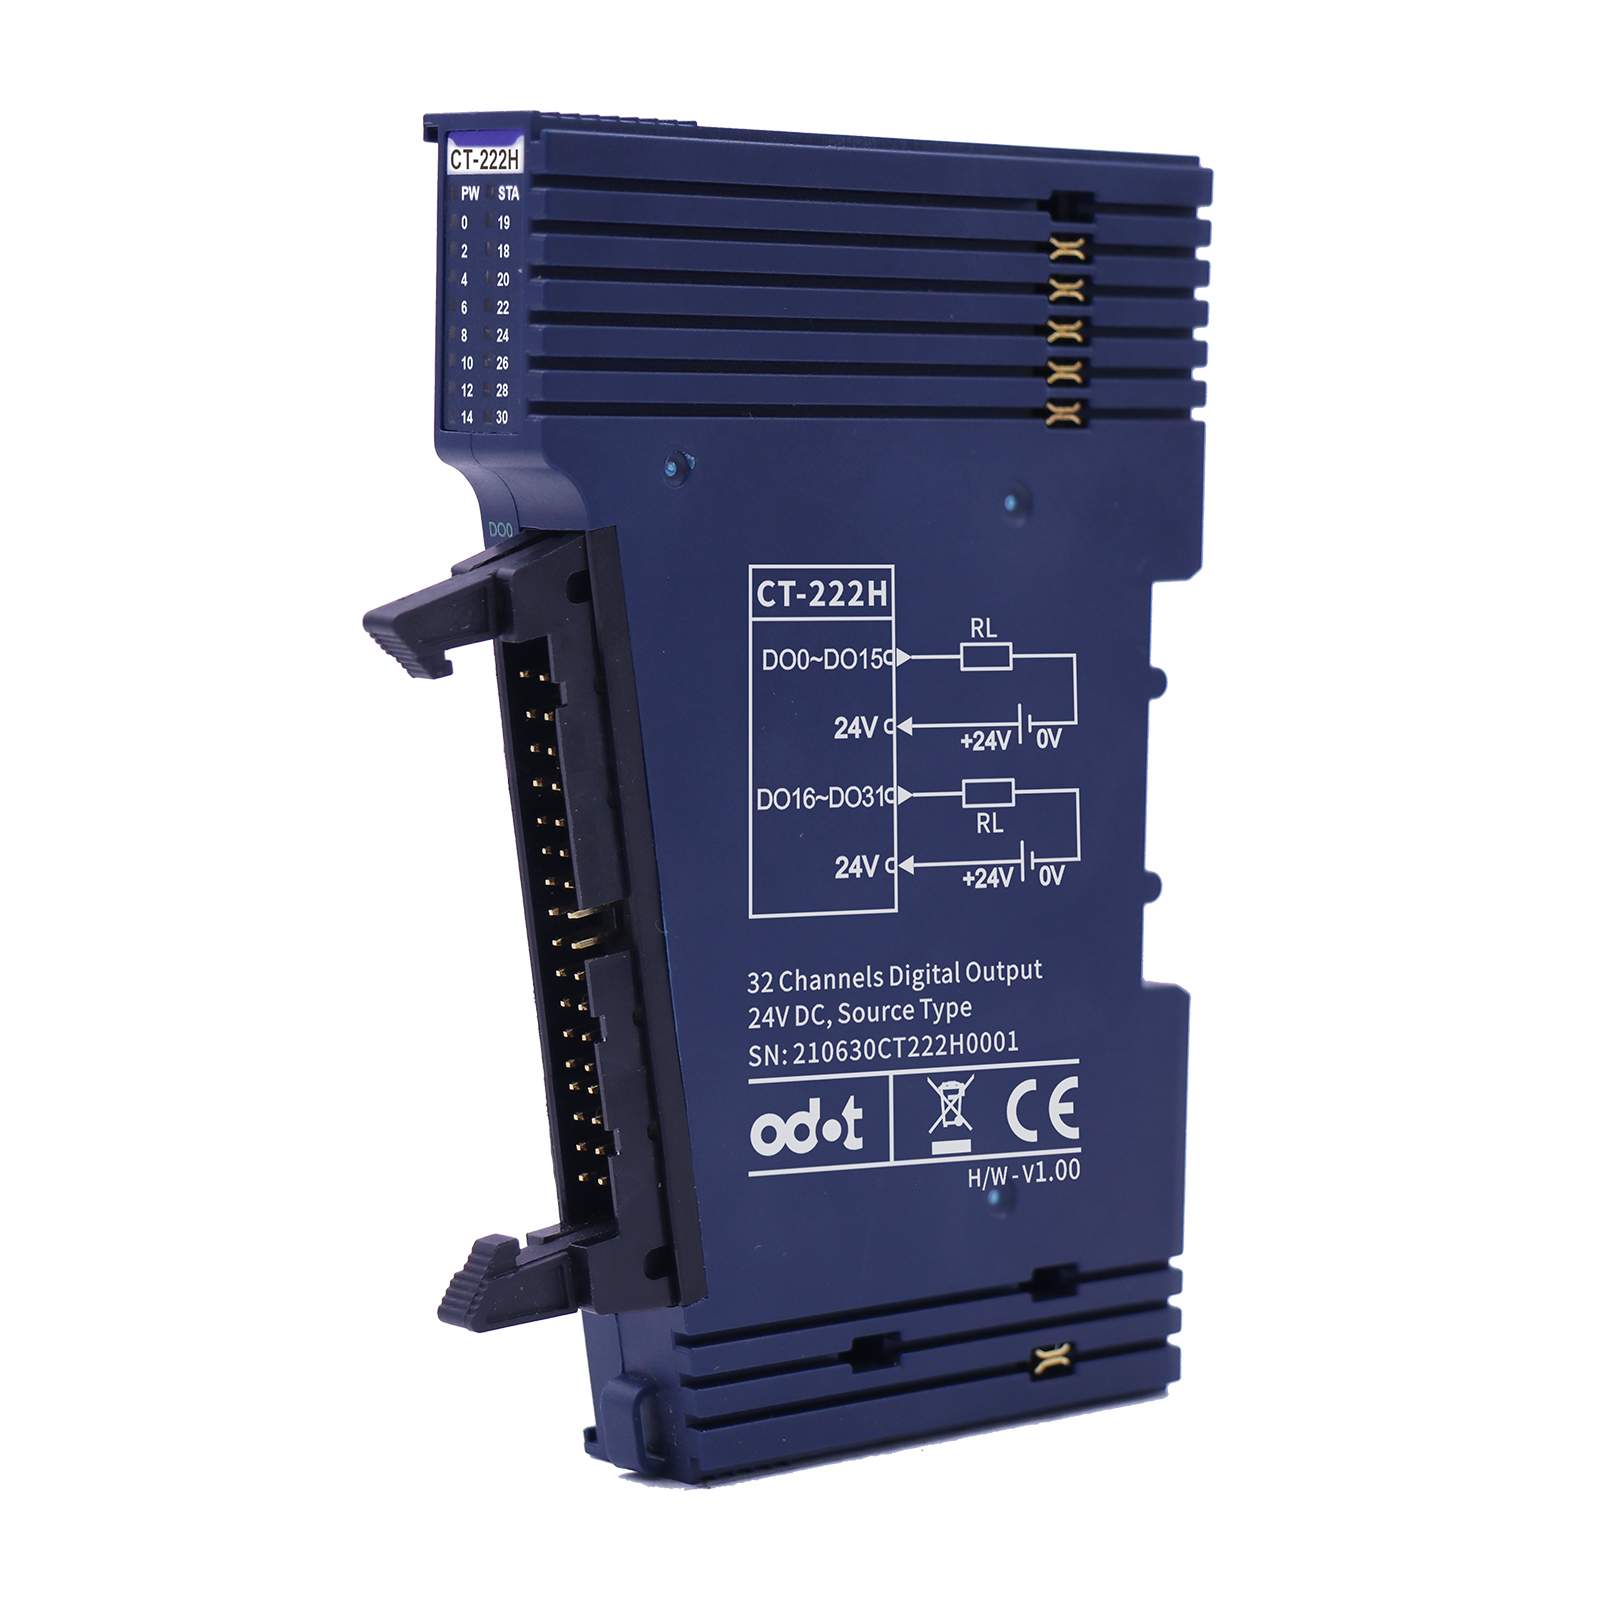 100% Original Modbus Tcp I/O Module - CT-222H: 32 channels digital output, source, 24Vdc/0.5A，34Pin male connector – ODOT